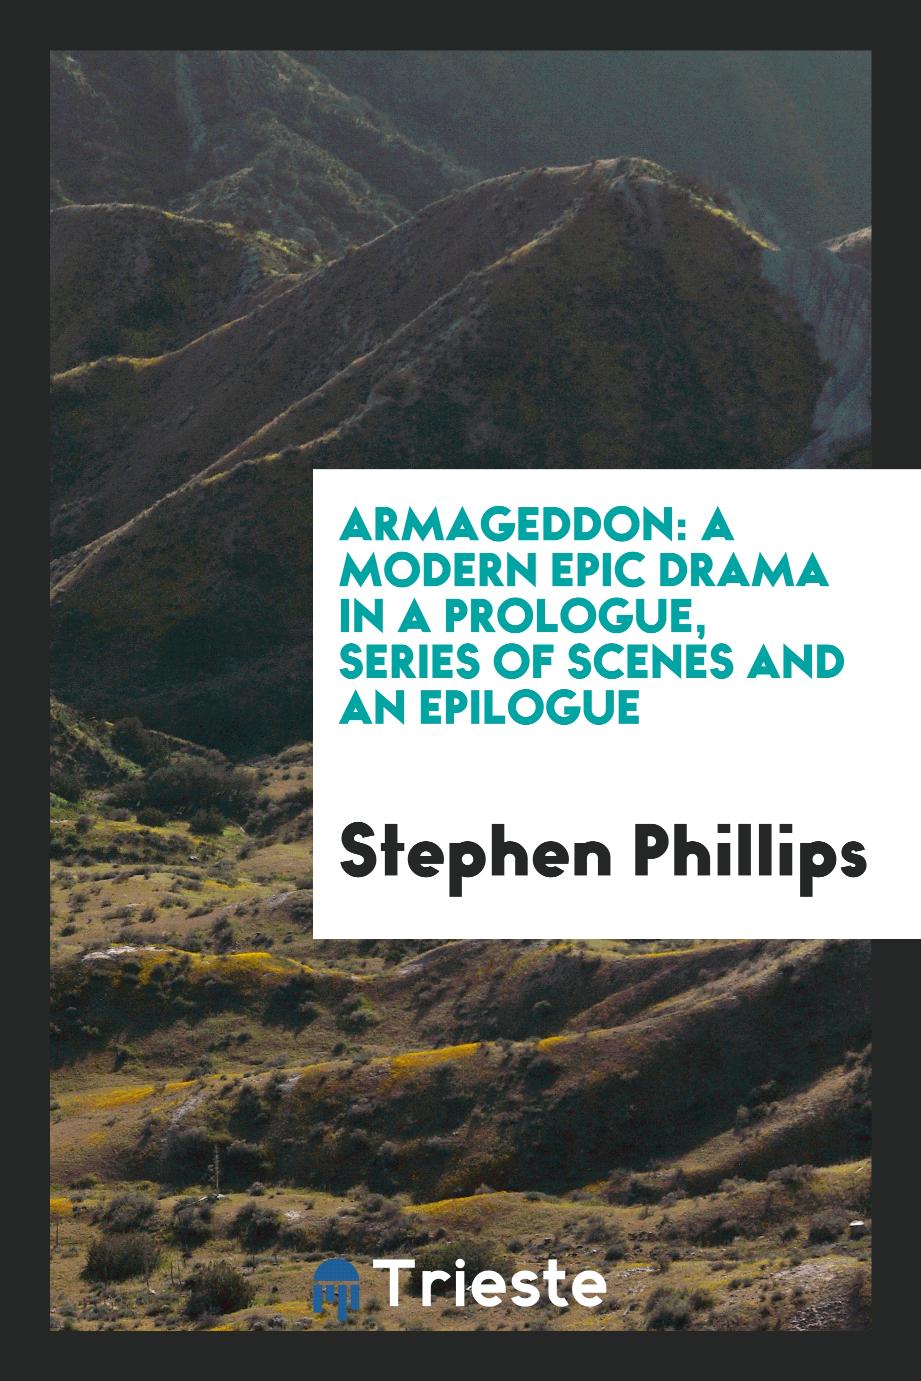 Armageddon: a modern epic drama in a prologue, series of scenes and an Epilogue